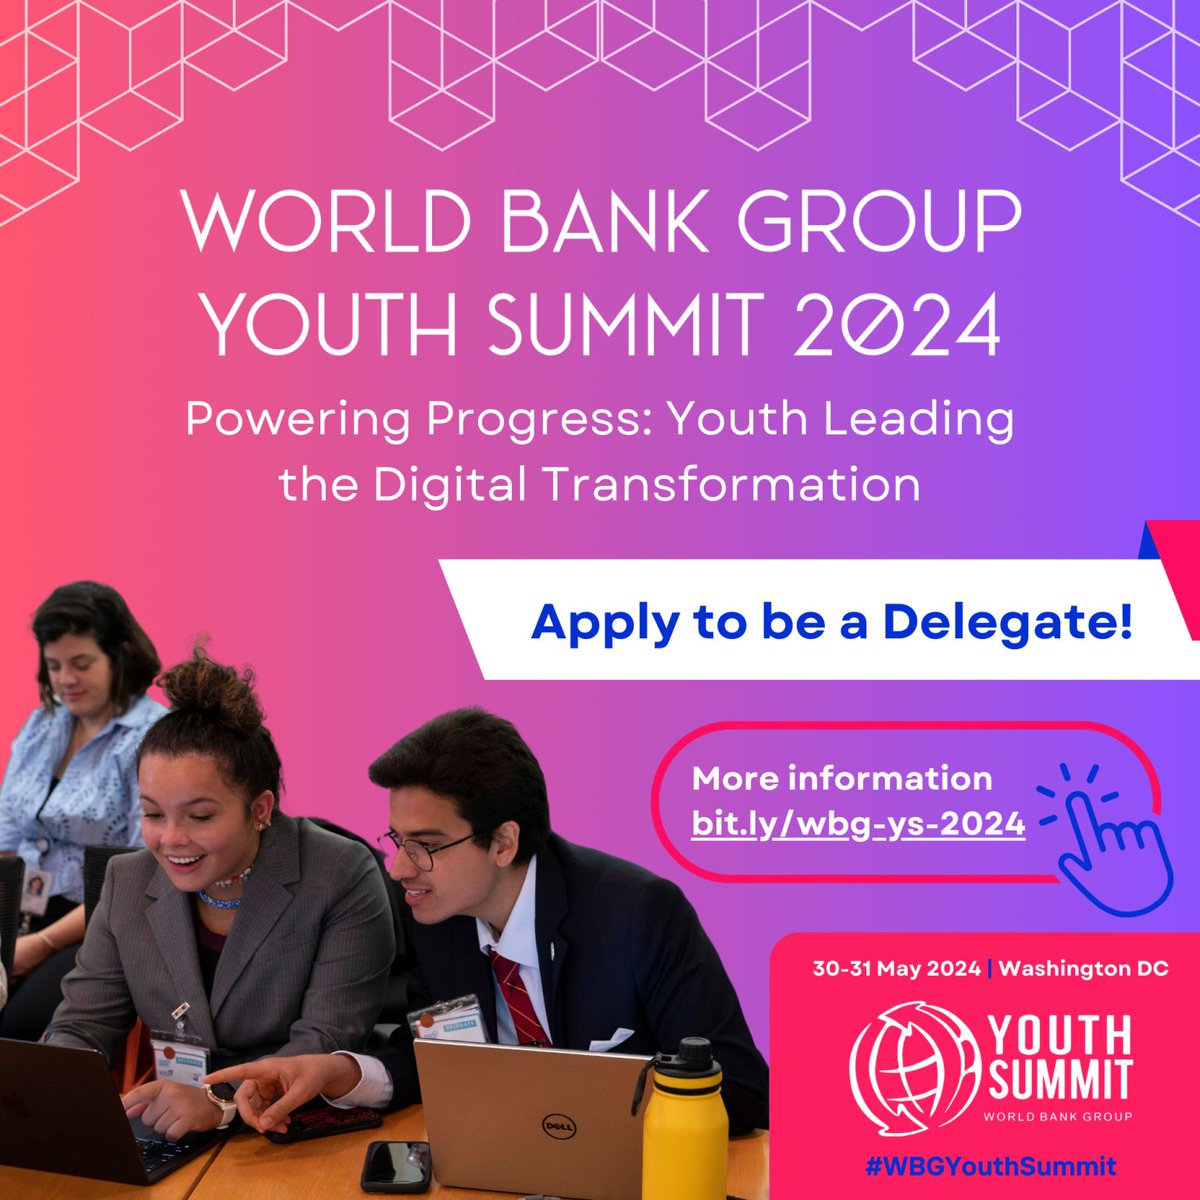 Apply to Join the @WorldBank Youth Summit 2024! Passionate about digital transformation and youth empowerment? Apply now! Open to all. Deadline: April 25th, 2024. Link shorturl.at/envz7 #YouthSummit #DigitalTransformation #Empowerment